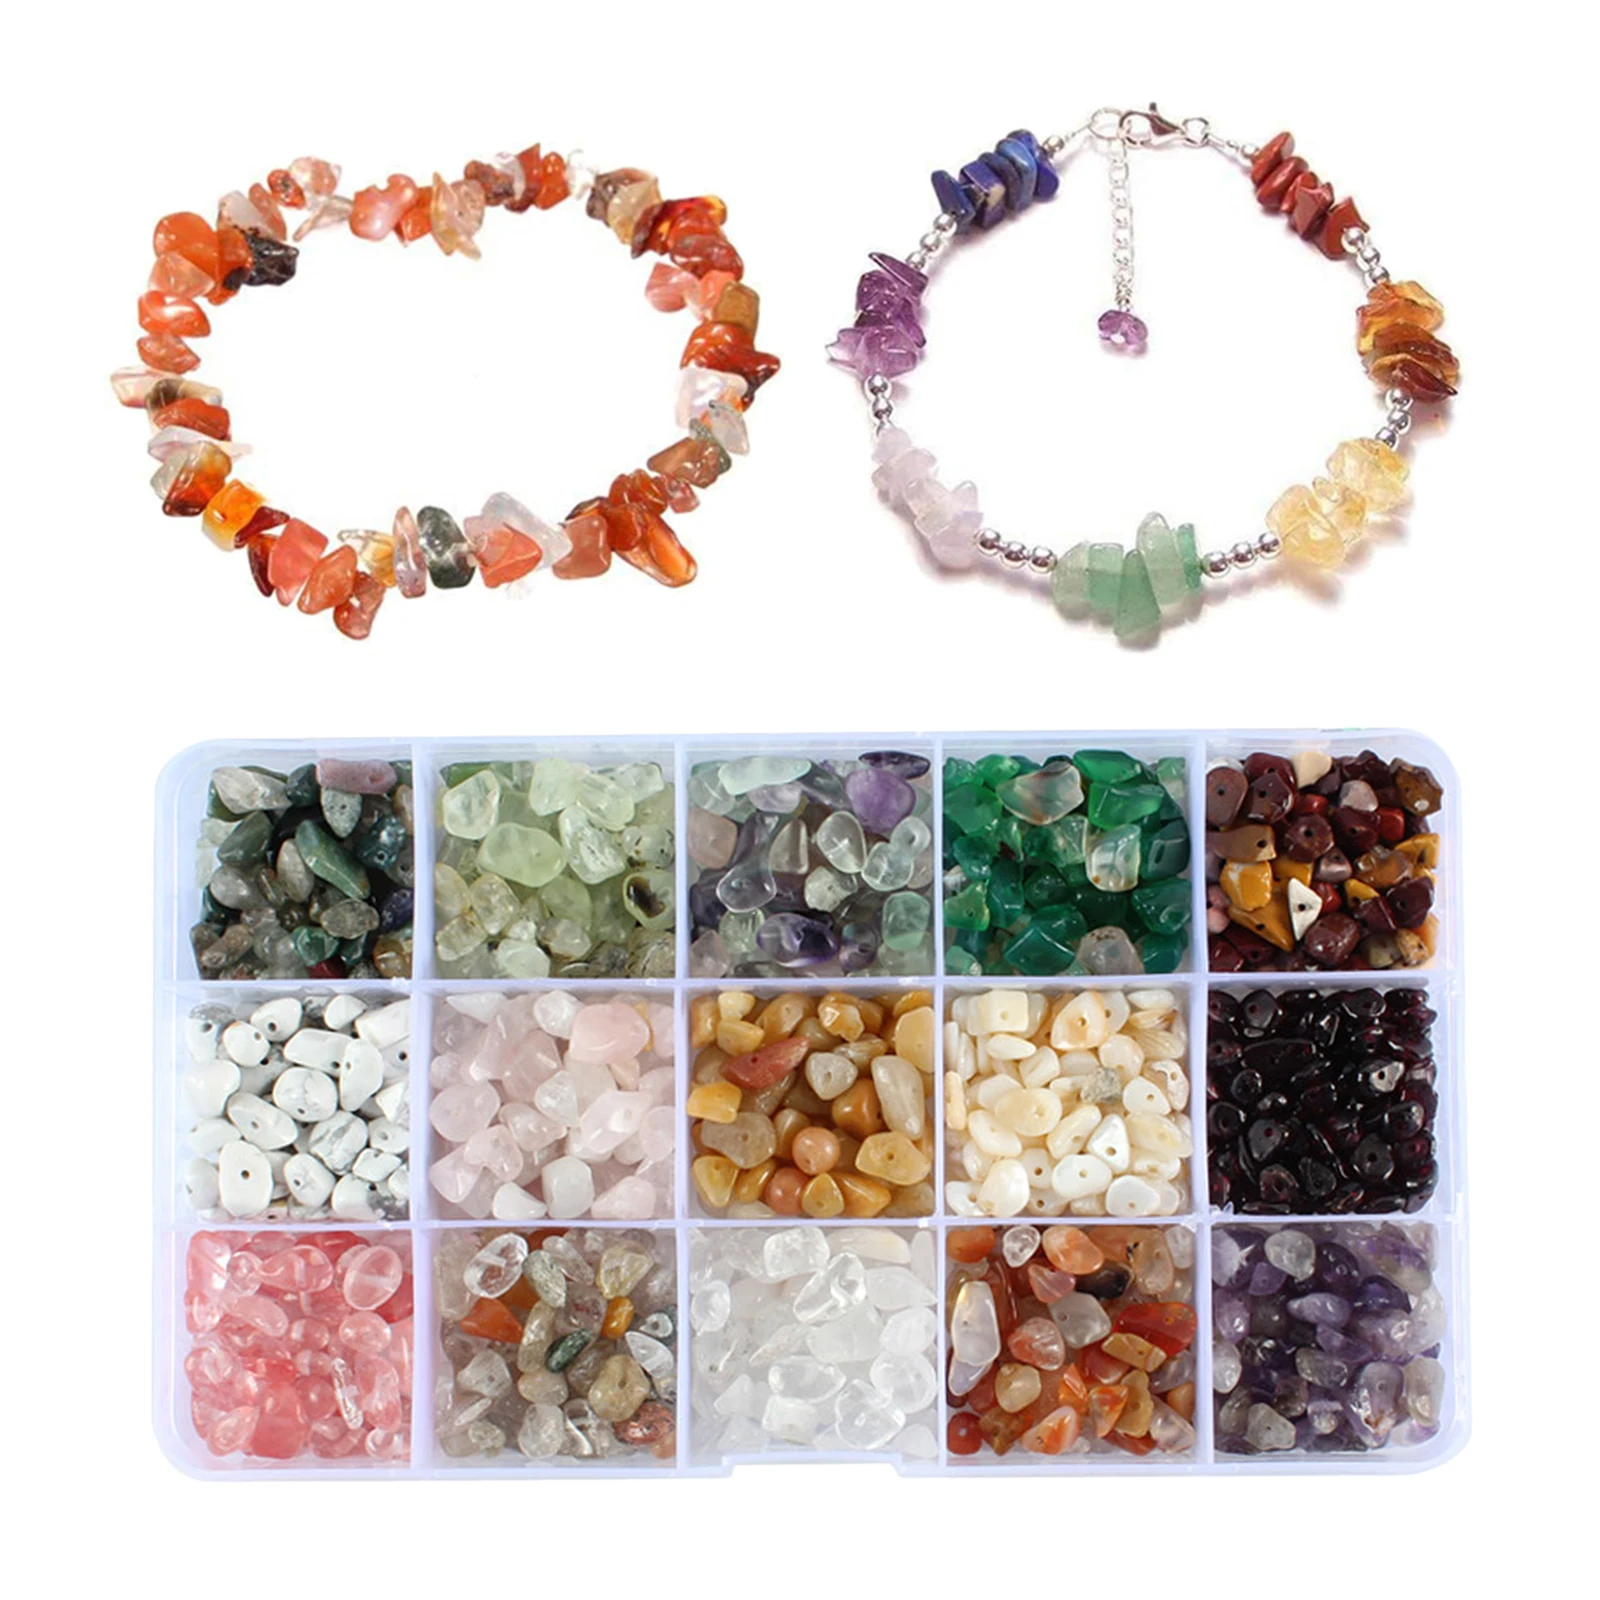 15 Colors Assorted Gemstone Beads Irregular Shaped Natural Chips Kit for DIY Craft Bracelets Necklaces Pendant Jewelry Making